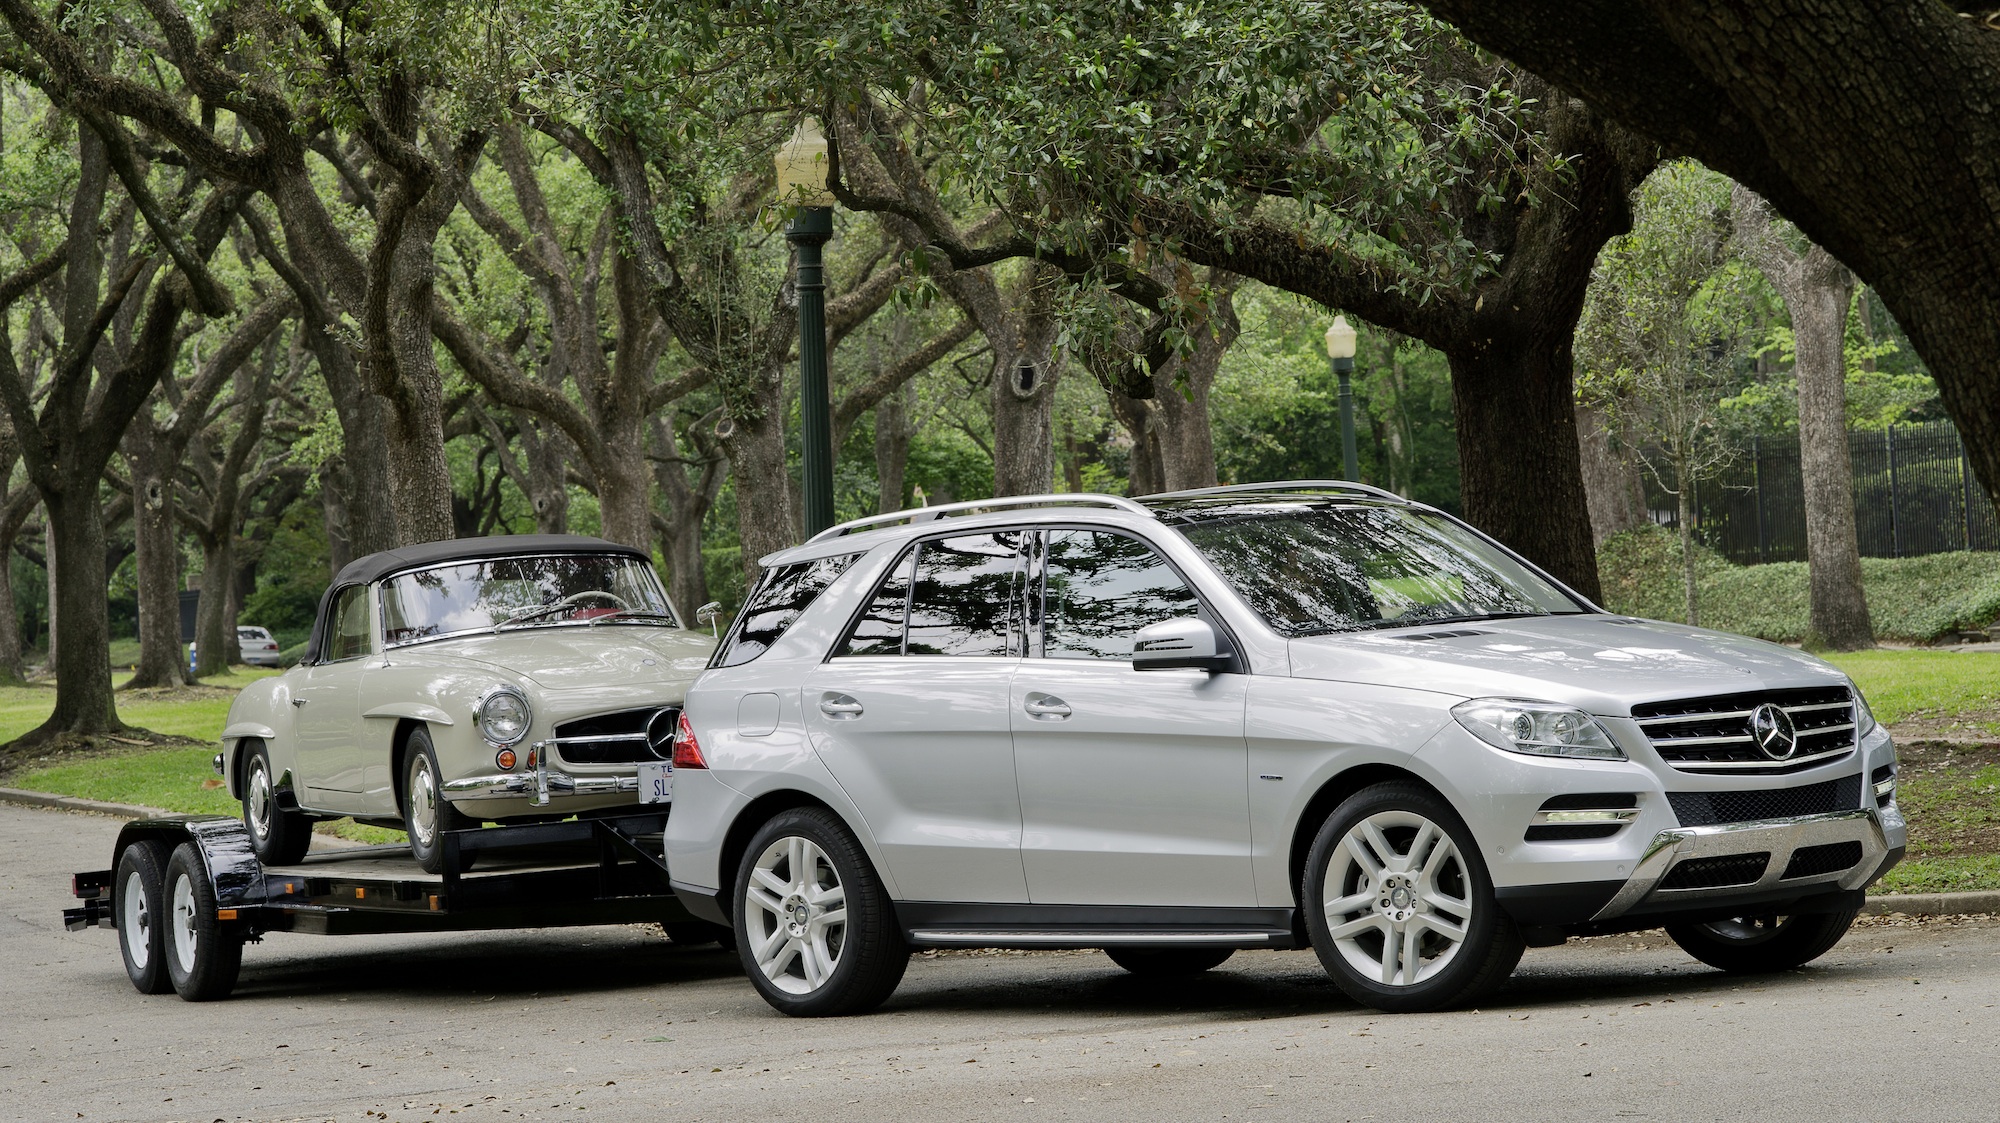 2012 MercedesBenz ML throws down gauntlet to Audi Q7 and